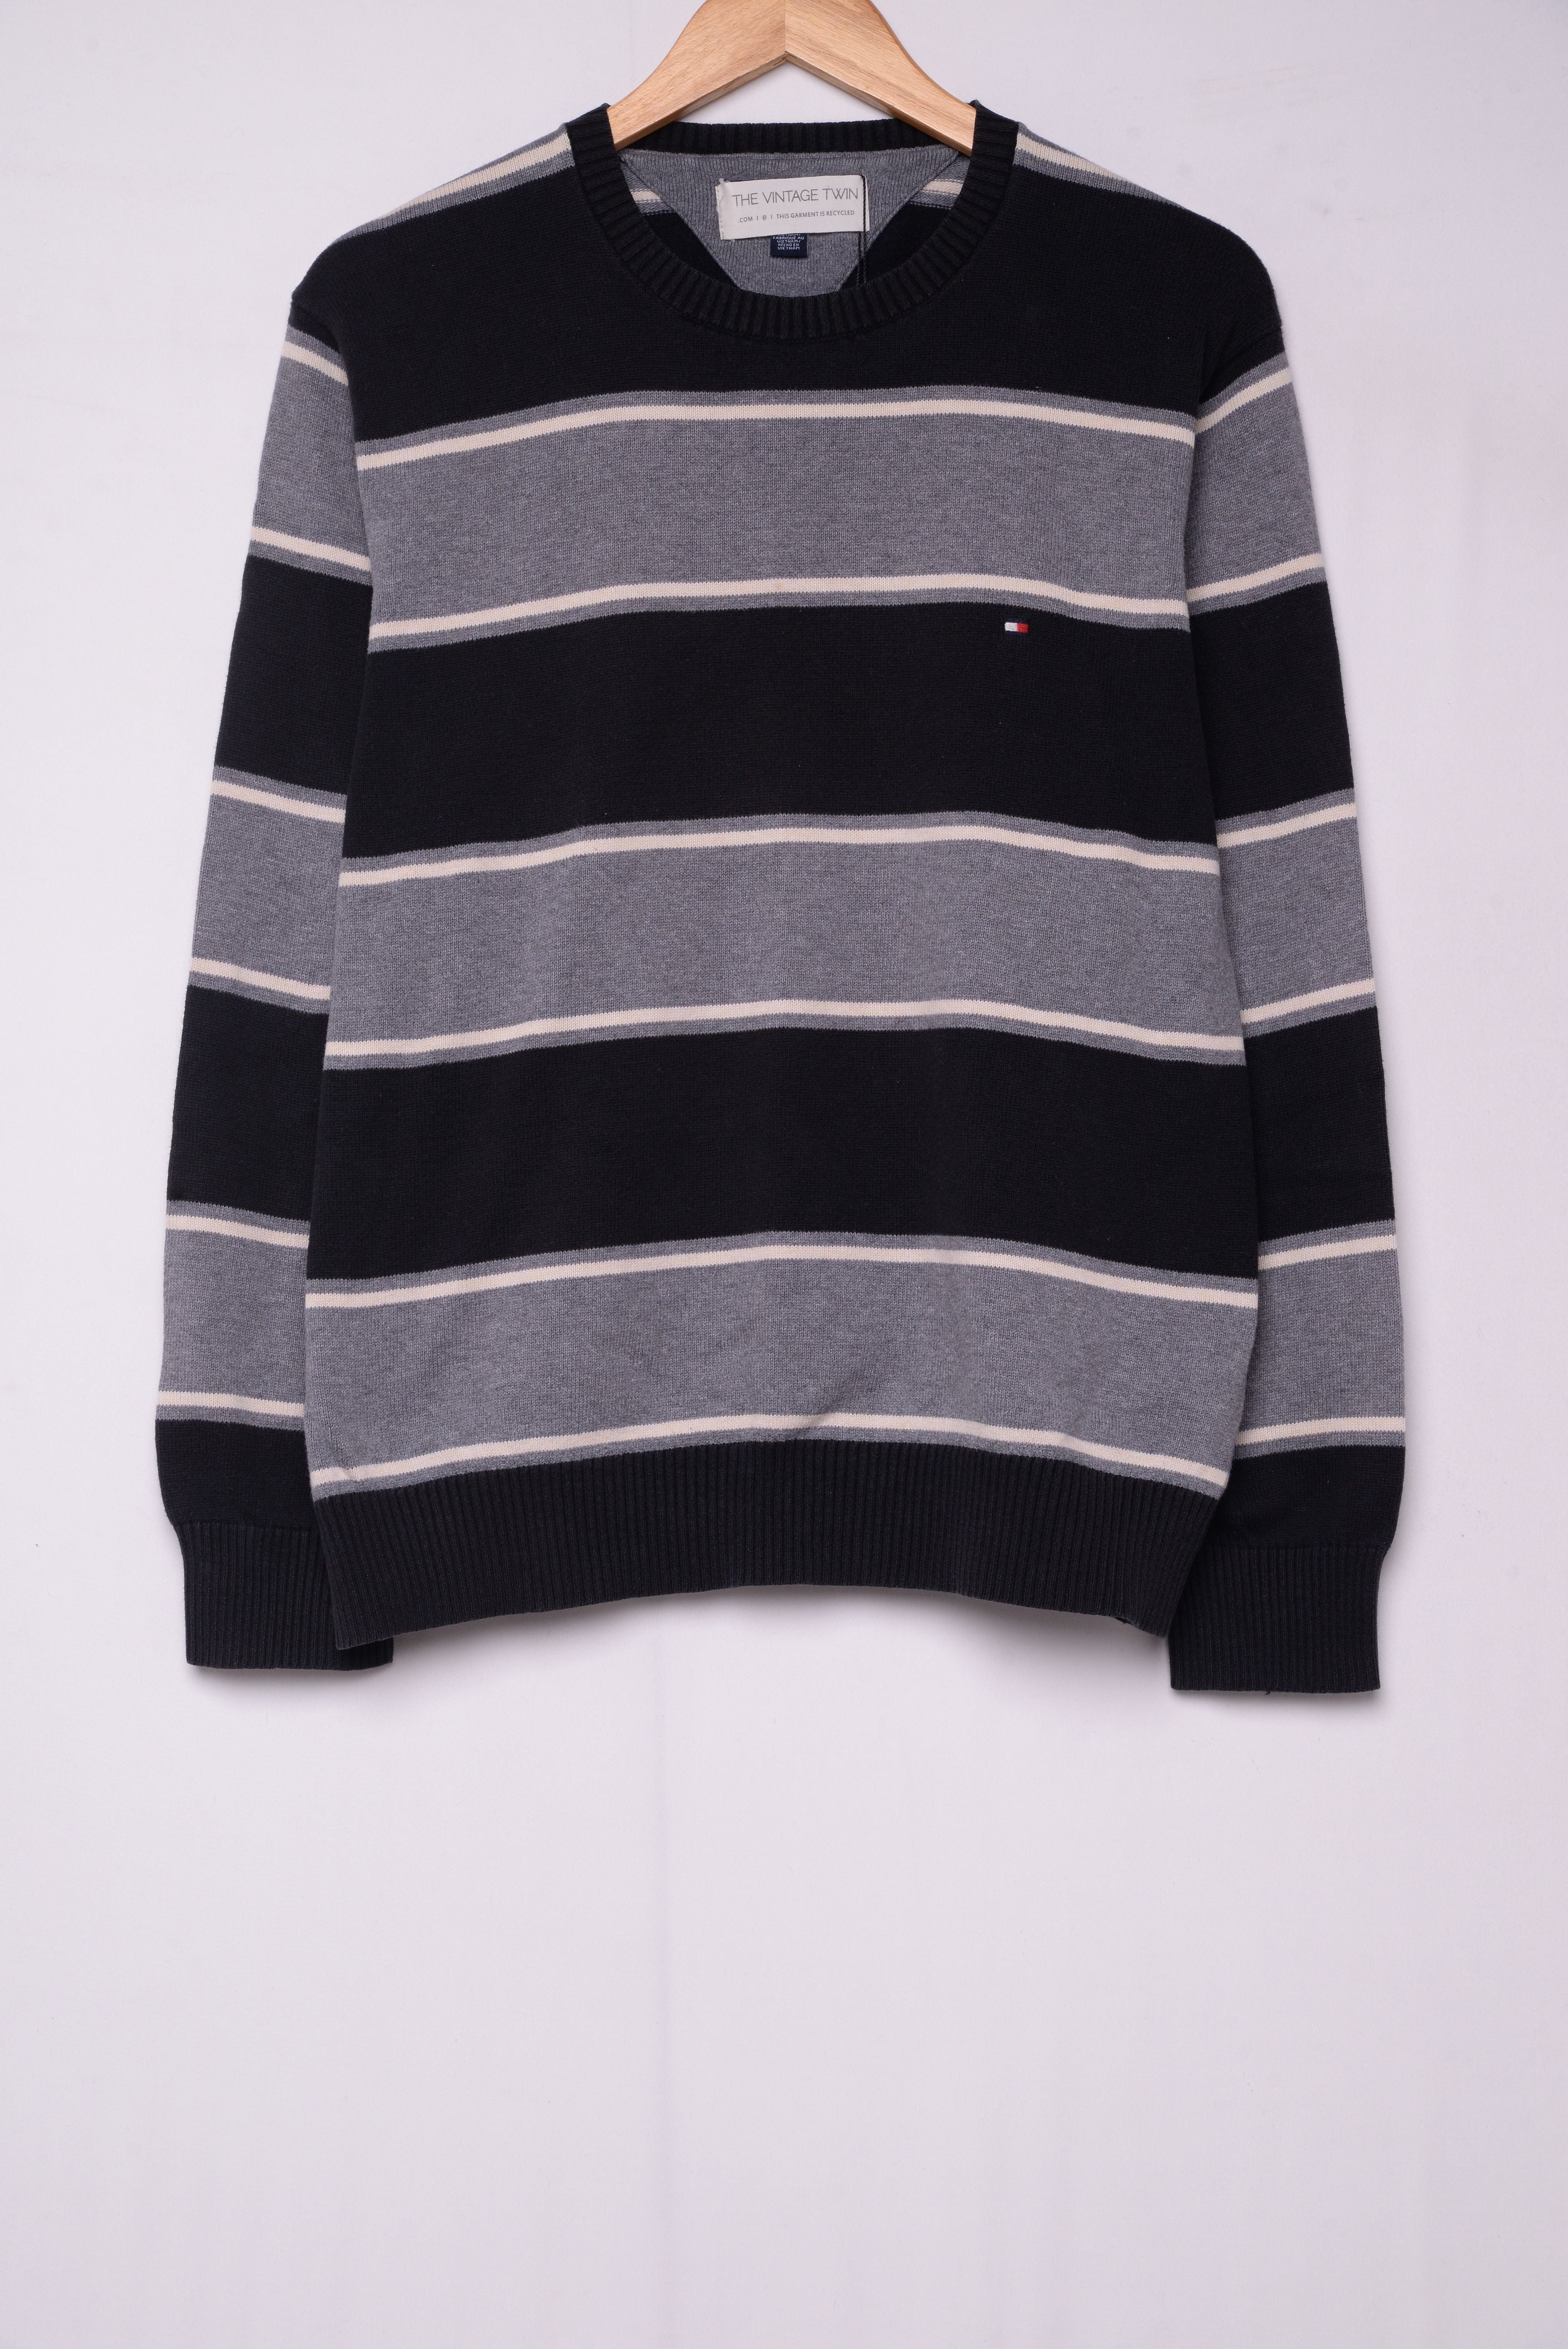 Kalmerend Federaal Opgewonden zijn Tommy Hilfiger Sweater Free Shipping - The Vintage Twin